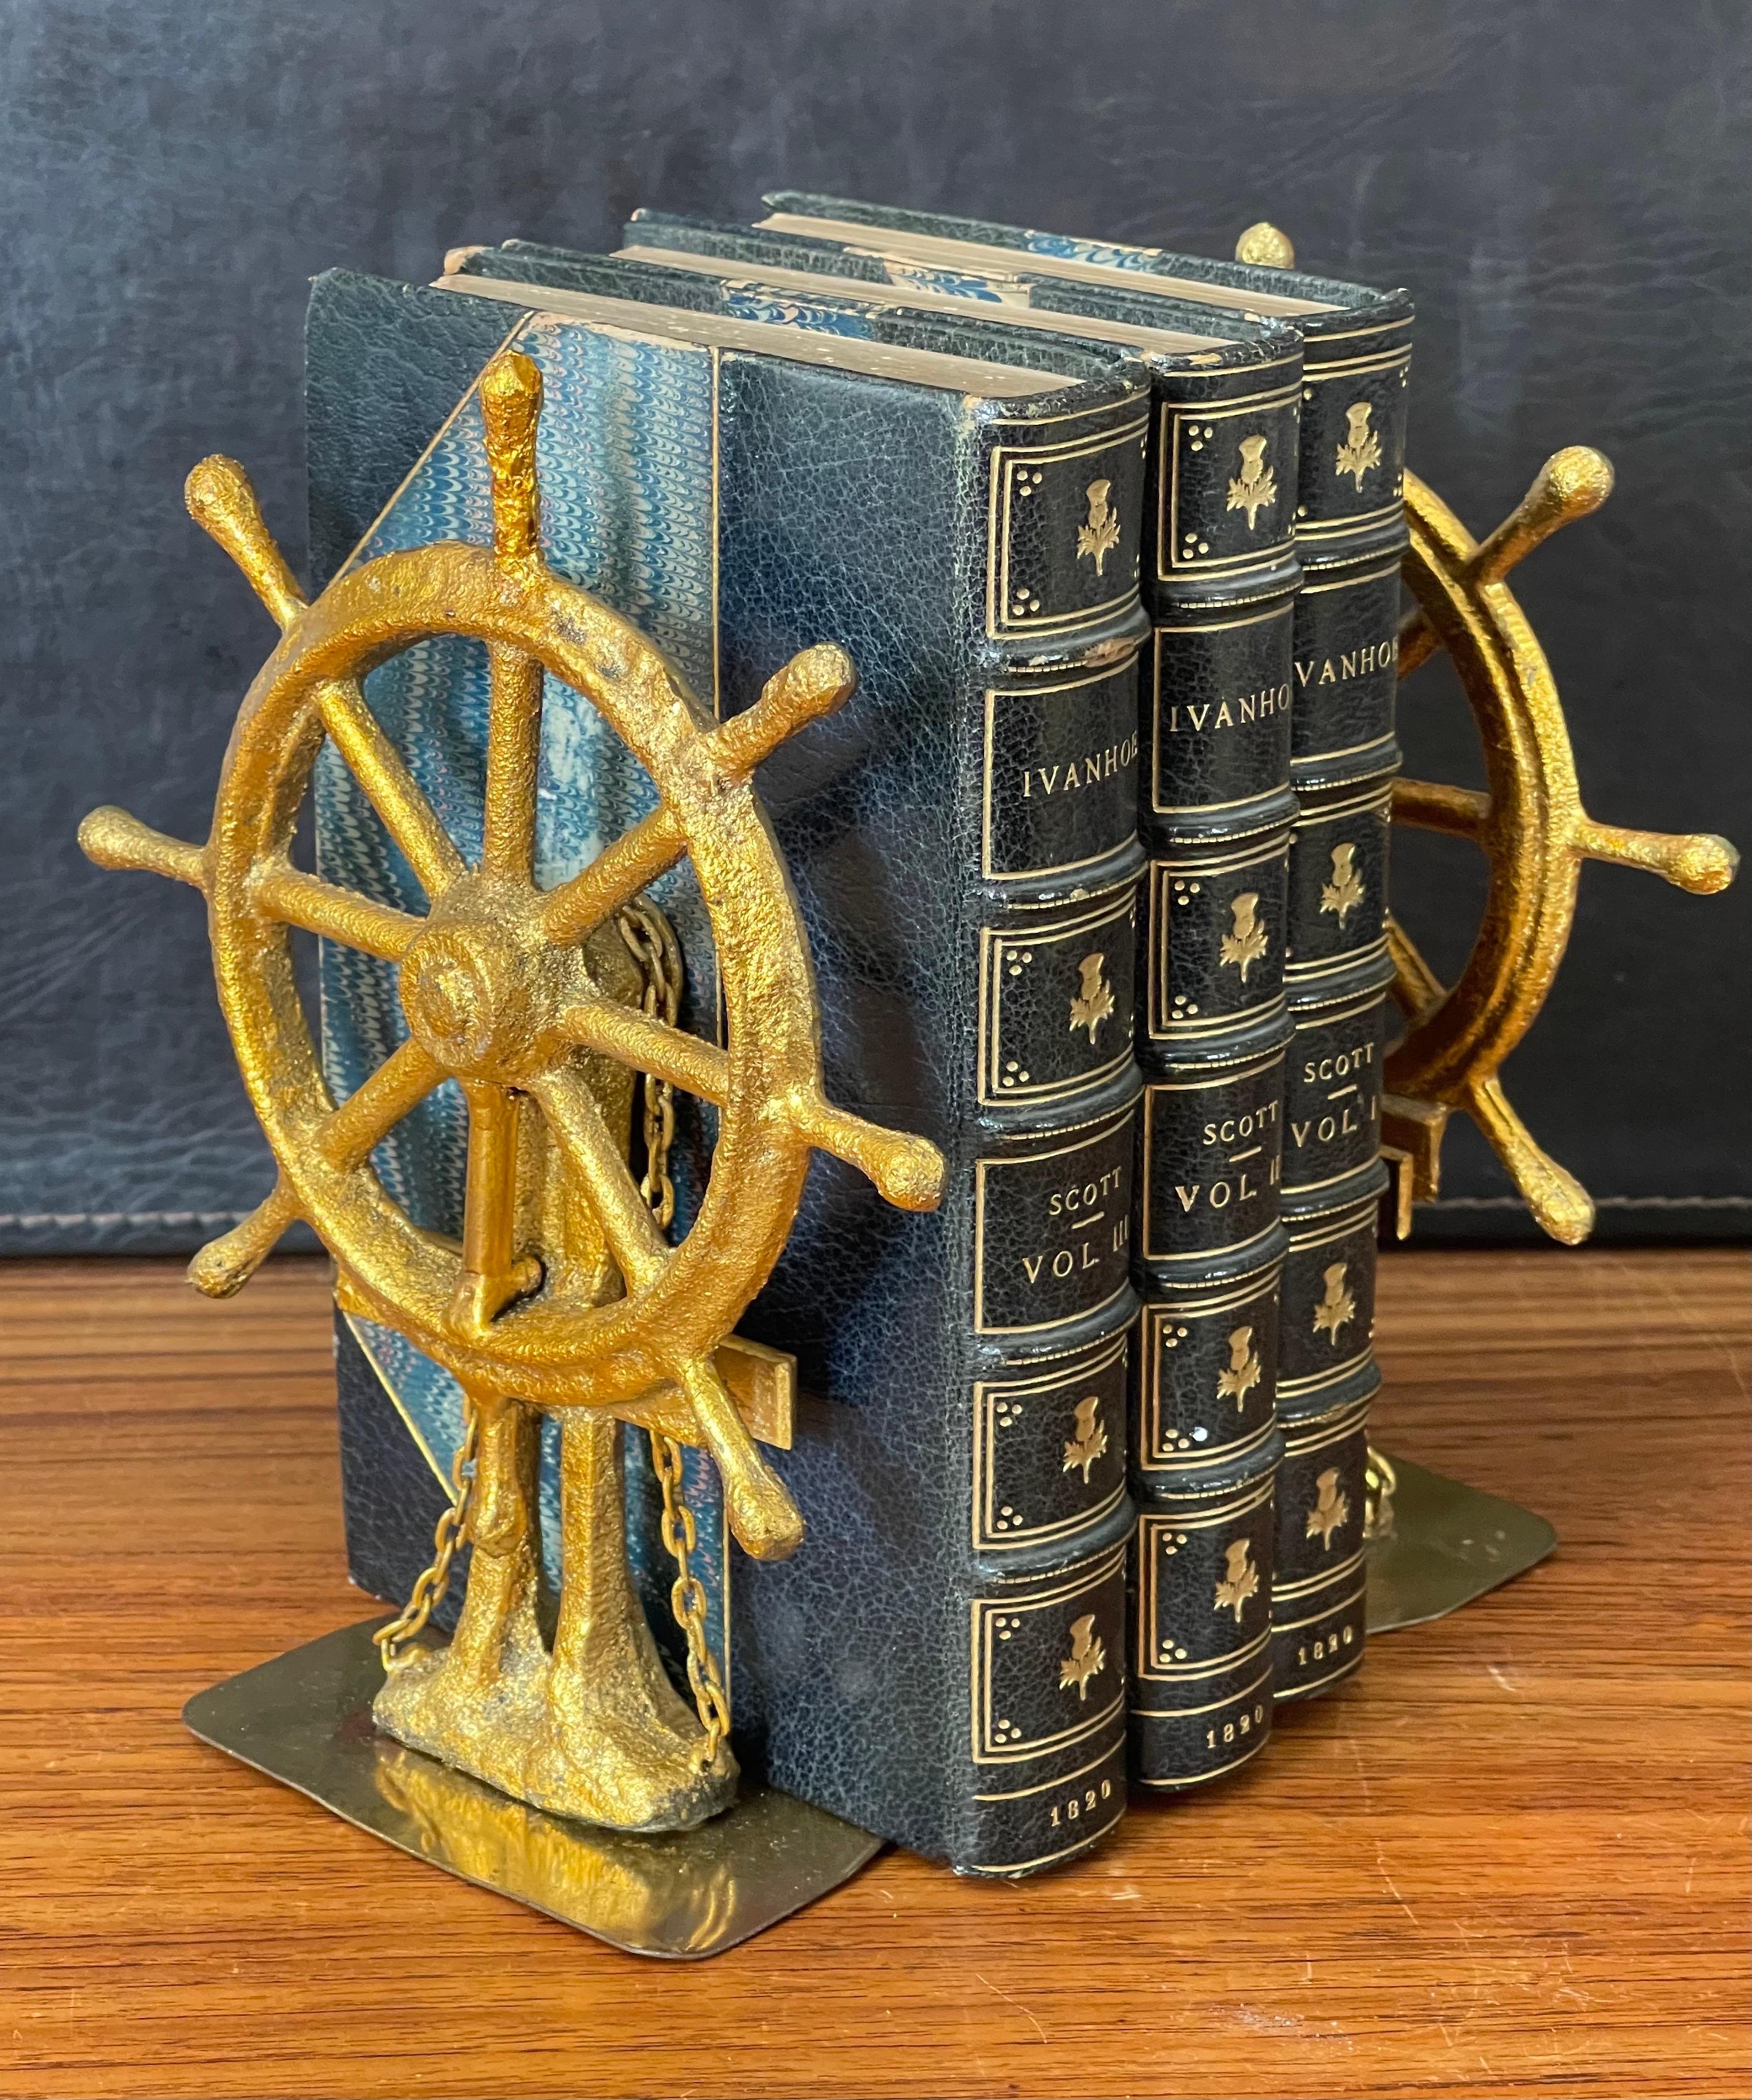 Excellent and rare pair of ship wheel bookends in gold leaf finish by Curtis Jere for Artisan House, circa 1977. The pair are signed and dated and are in very good vintage condition with a wonderful patina. They measure 12